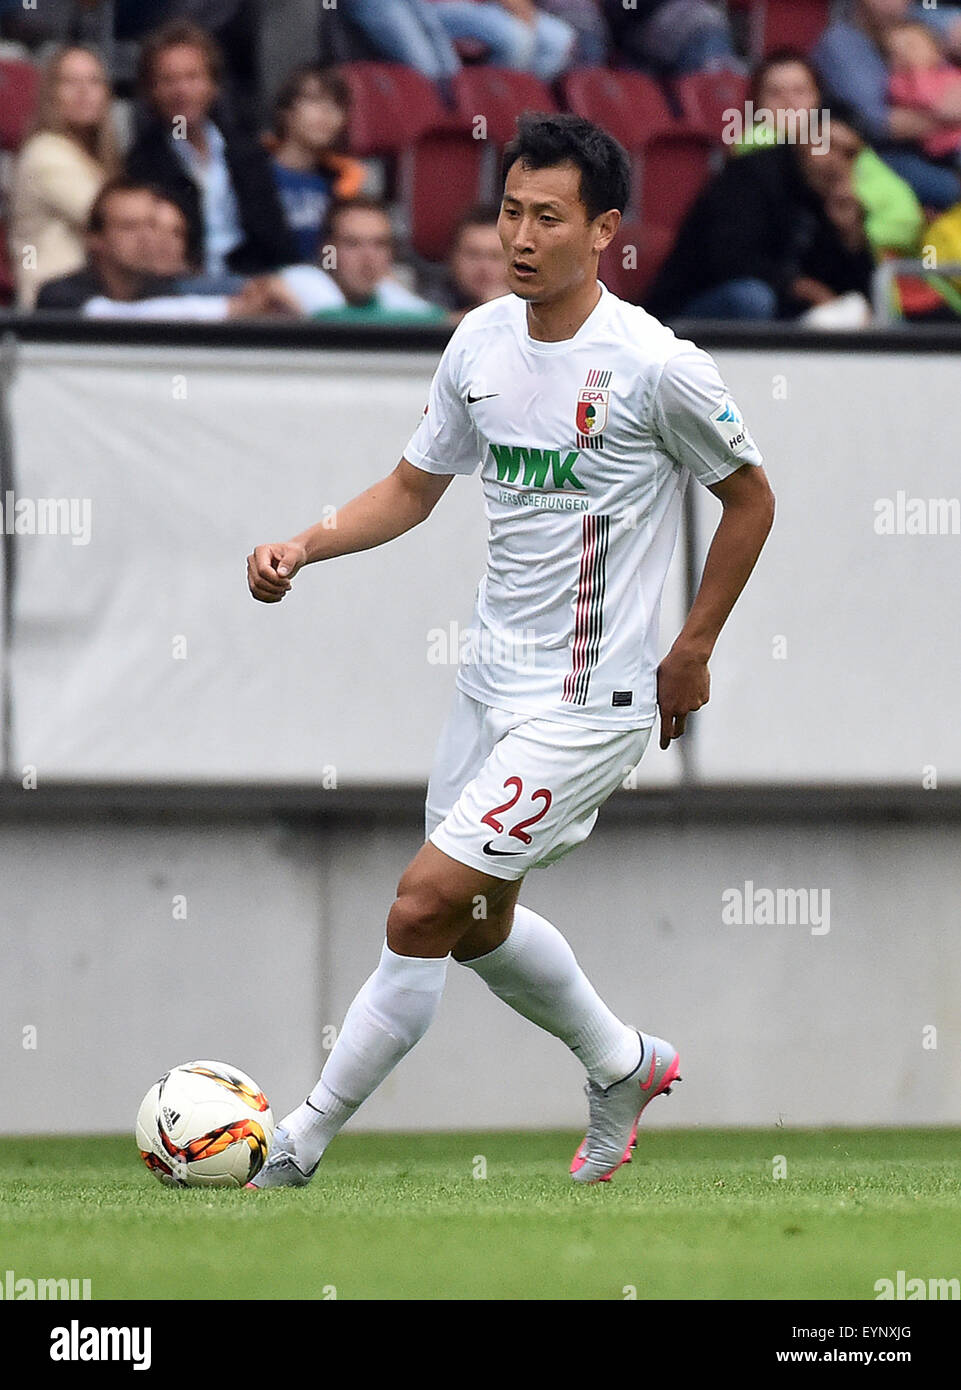 Augsburg, Germany. 01st Aug, 2015. Augsburg's Dong Won Ji in action during a friendly between German Bundesliga soccer club FC Augsburg and France's FC Toulouse in Augsburg, Germany, 01 August 2015. Photo: Stefan Puchner/dpa/Alamy Live News Stock Photo